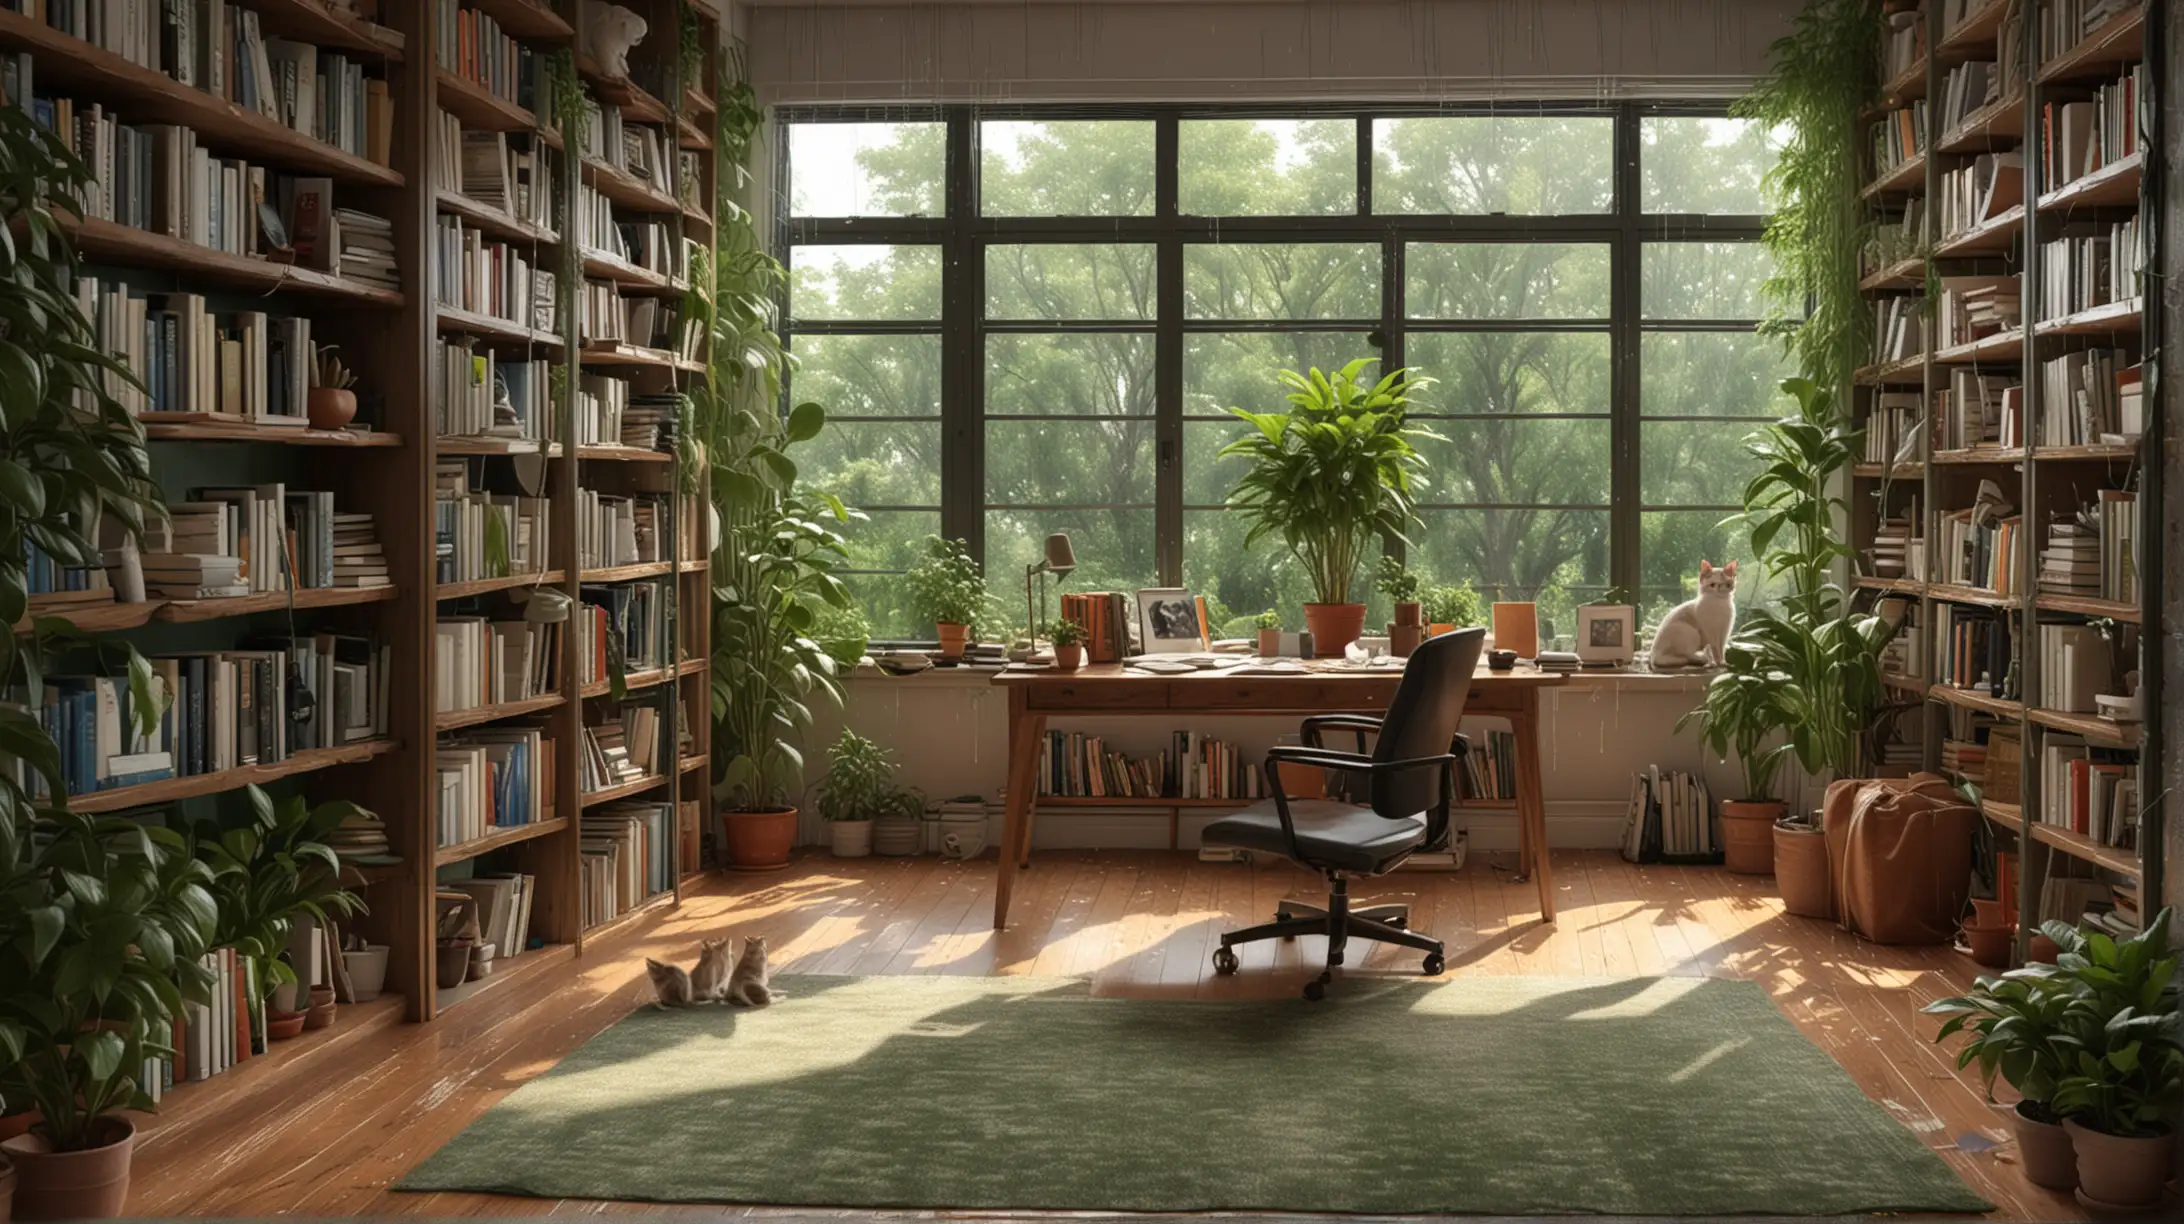 Inviting Study Room with FloortoCeiling Bookshelves and Rainy Day Ambiance